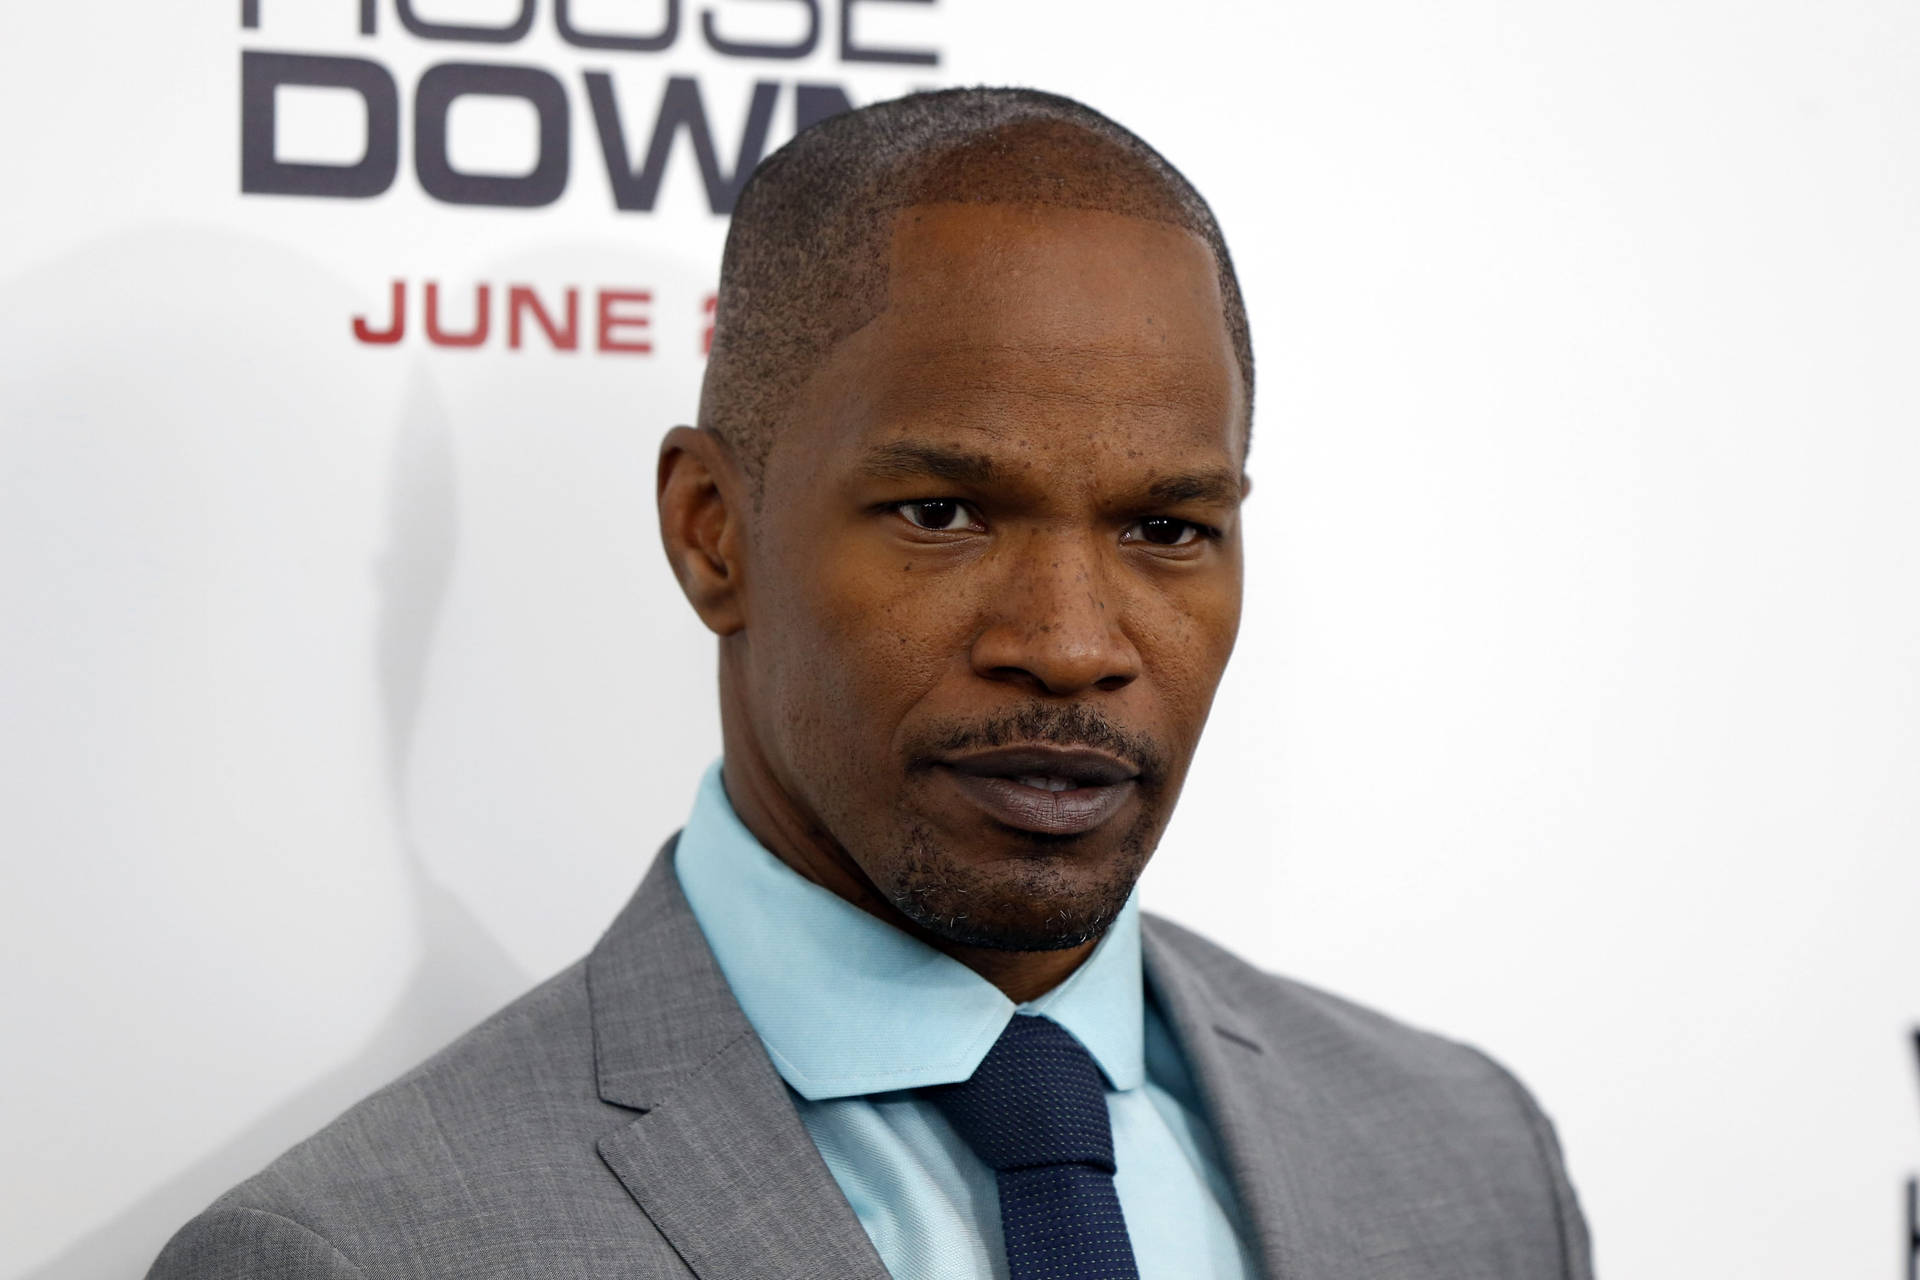 Jamie Foxx attending the 'White House Down' premiere in Hollywood. Wallpaper